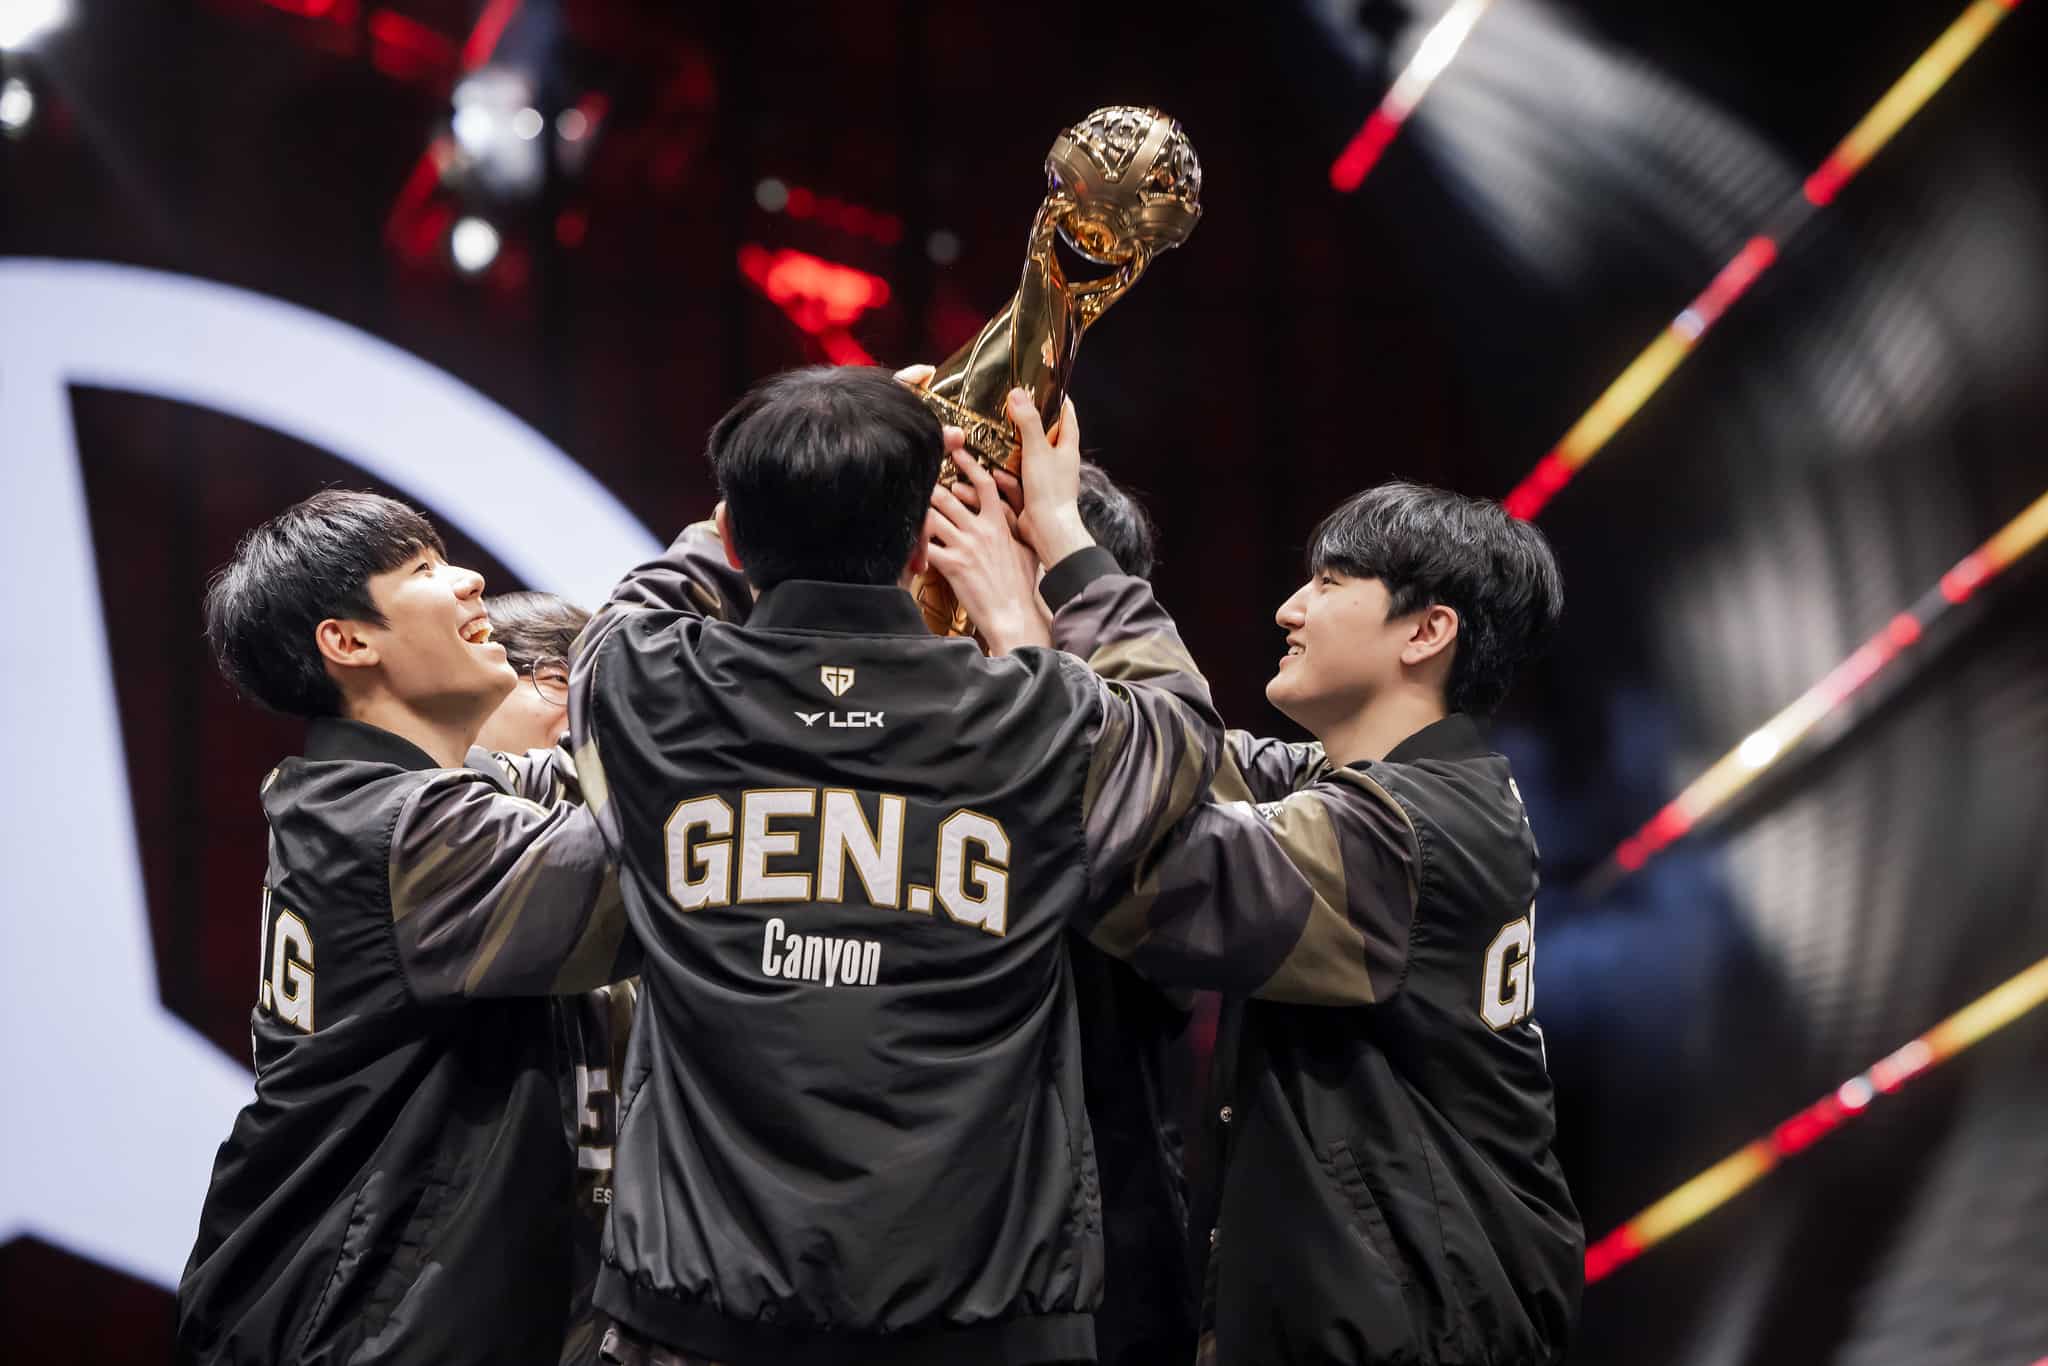 Gen.G breaks LPL stranglehold over MSI with historic win to secure Worlds spot